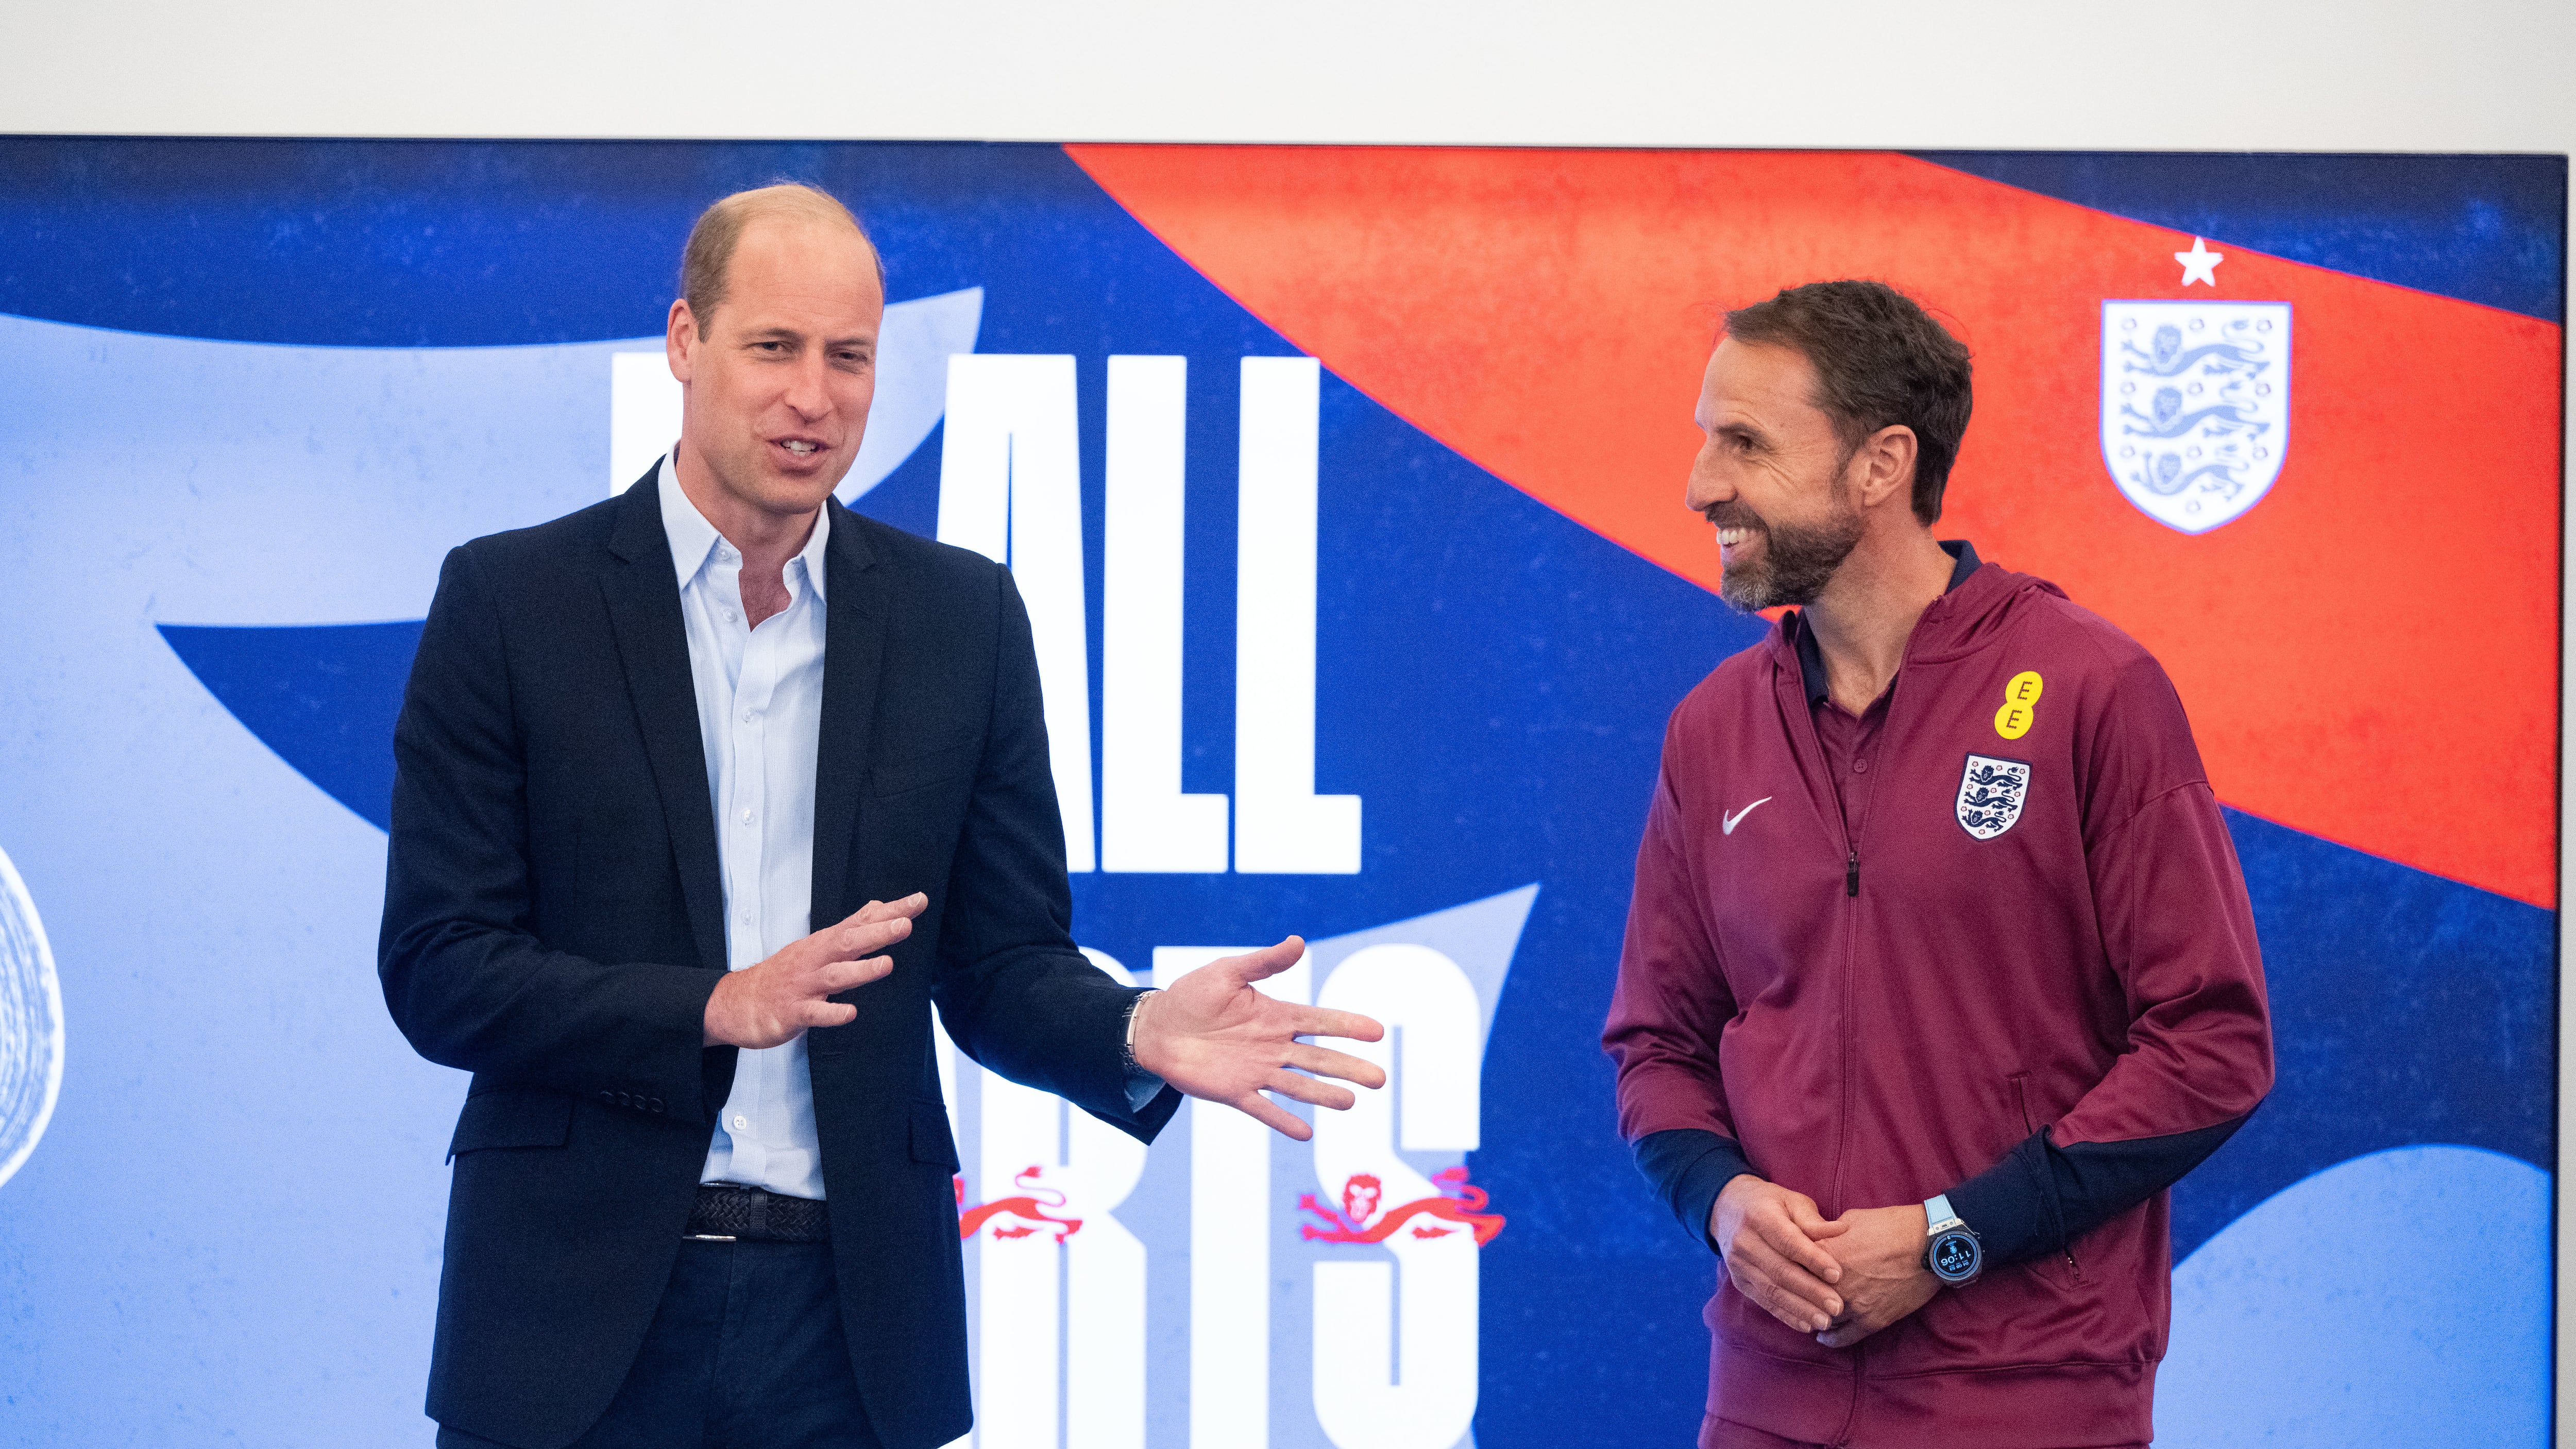 The Prince of Wales will watch the England team in their next Euro 2024 game in Germany